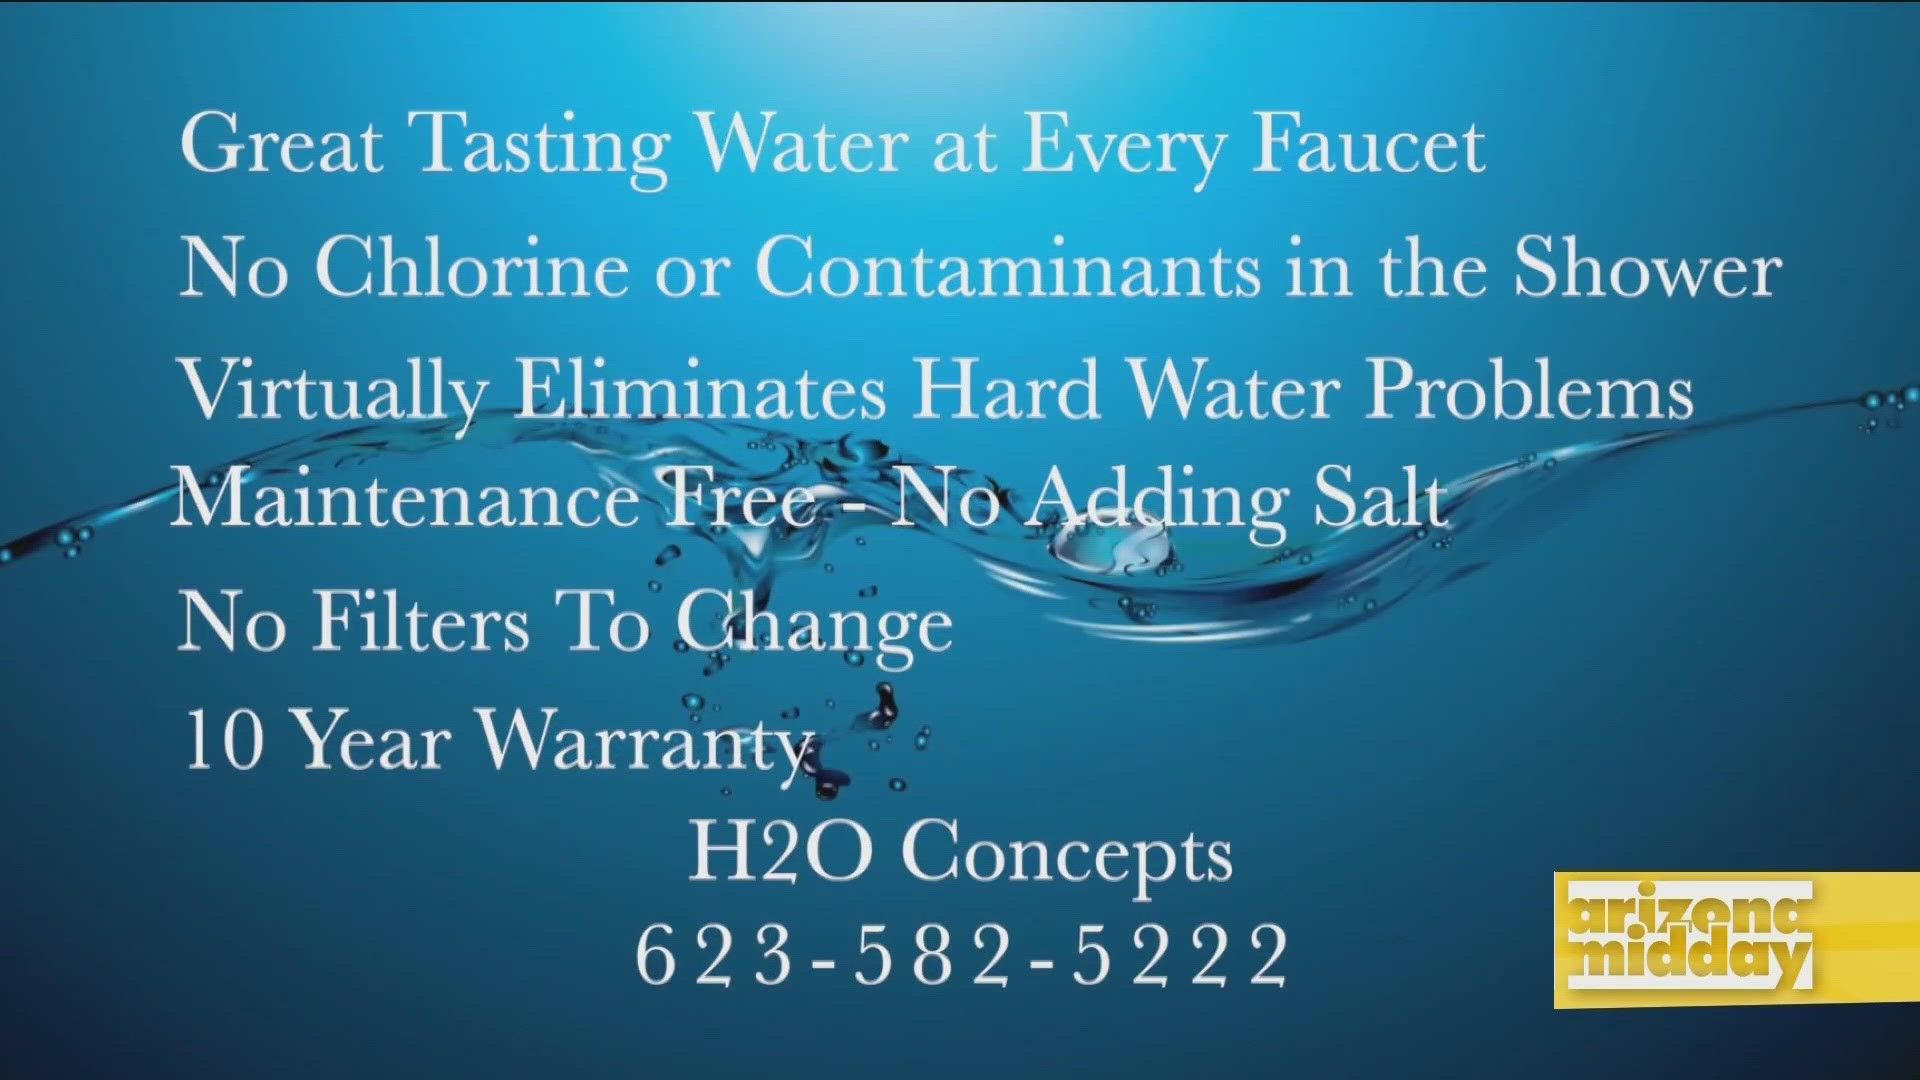 Water consultant Derk Chamberlin talks about H2O Concepts' advanced water filtration system that helps make your water safe, soft and taste great!